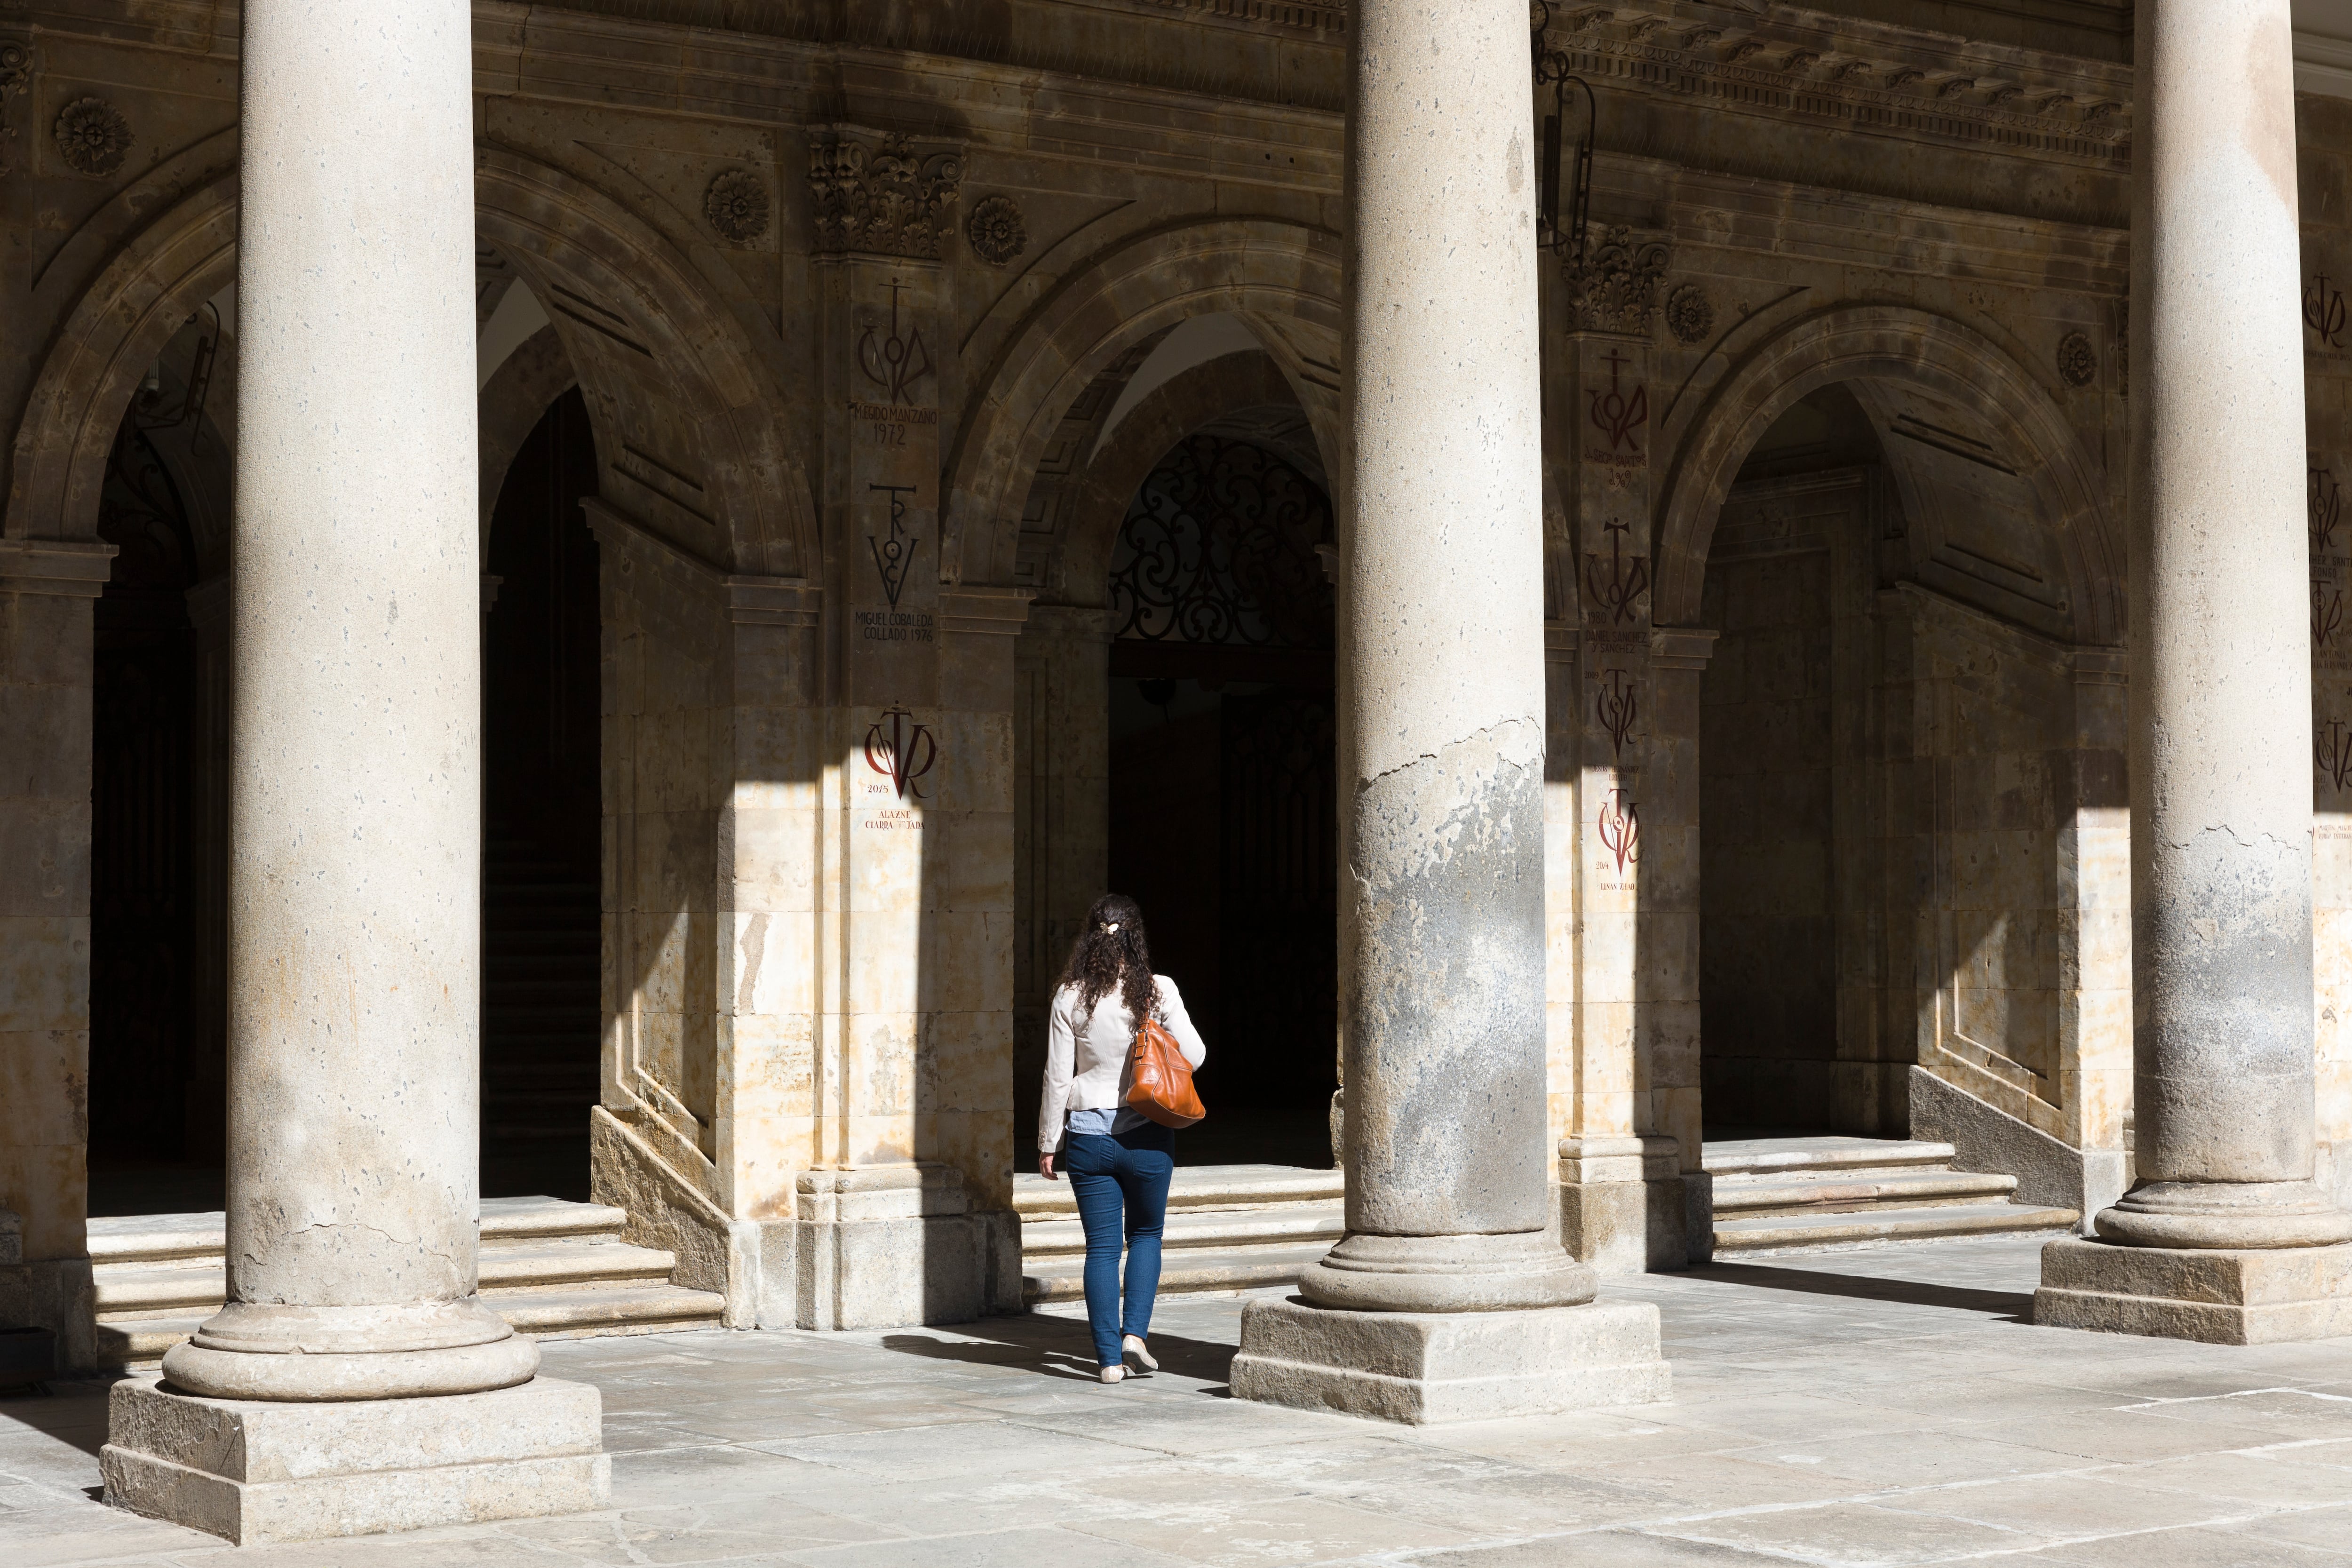 A student at the University of Salamanca's faculty of philology, Spain.